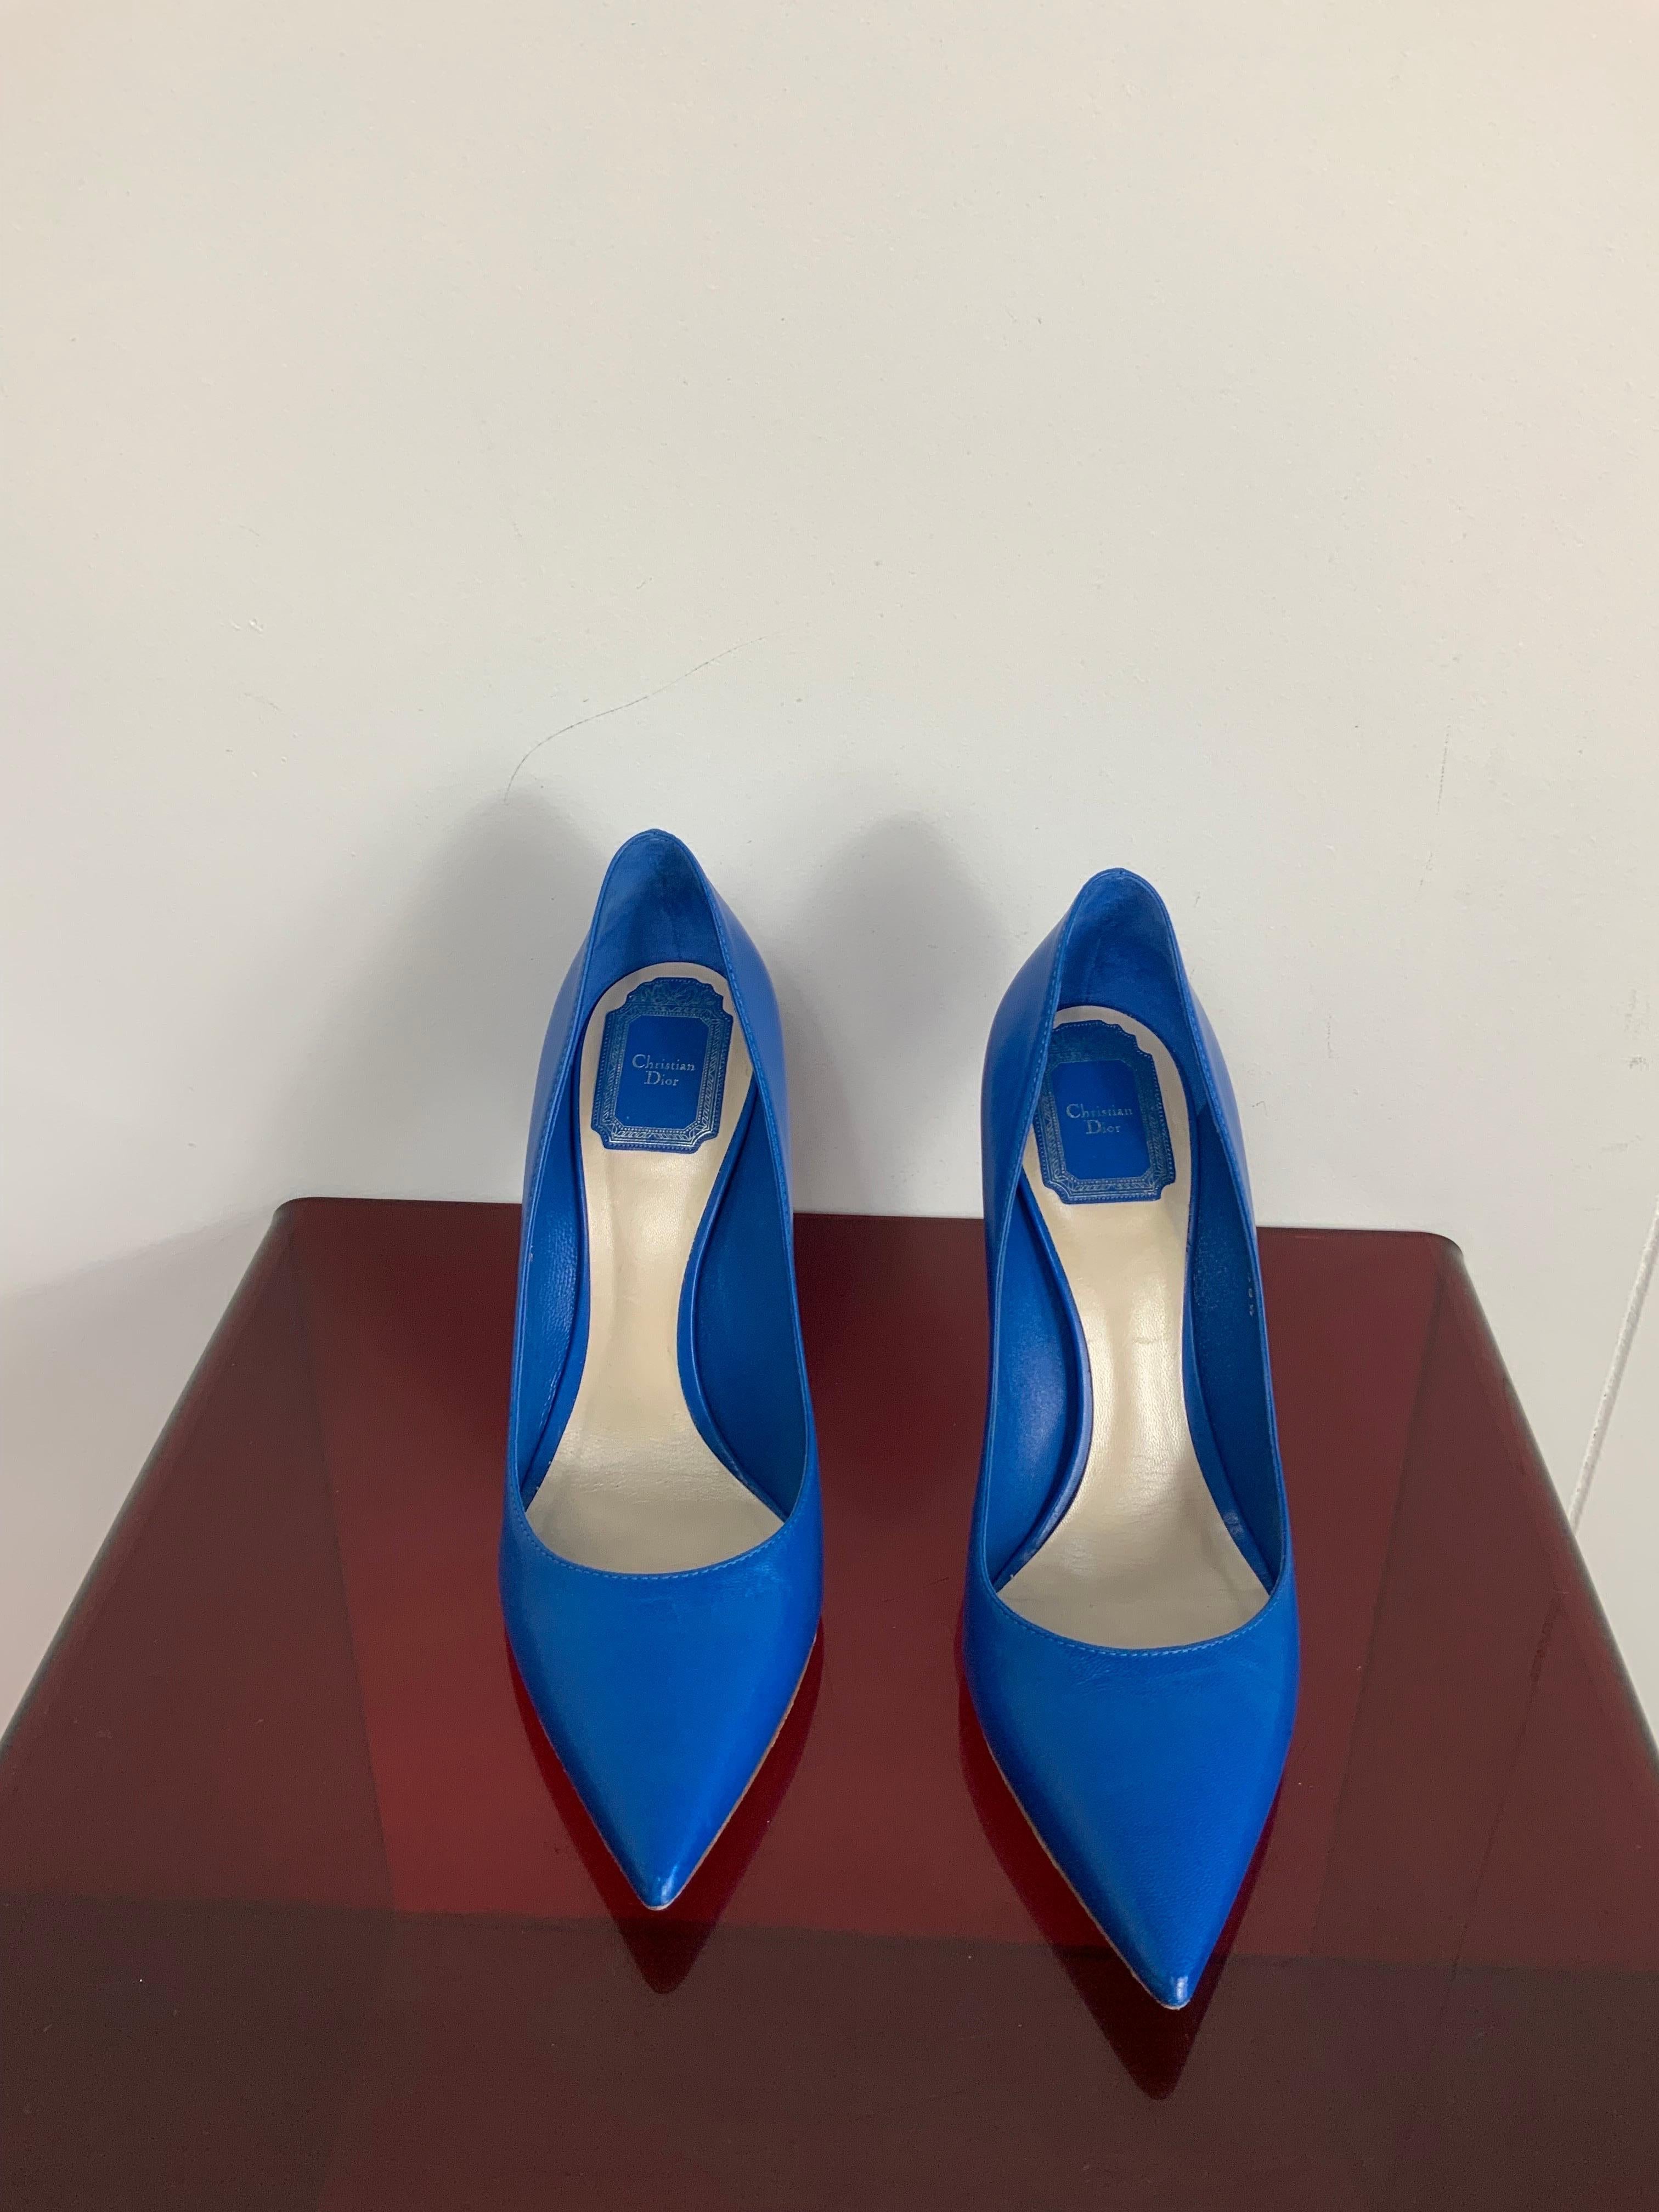 BLUE STILETTO CHRISTIAN DIOR.
In electric blue leather.
Number 38 and a half.
The heel measures 10 cm
The inner sole measures 26 cm.
It has tiny internal spots, as shown in the photos.
Excellent general conditions, used little.